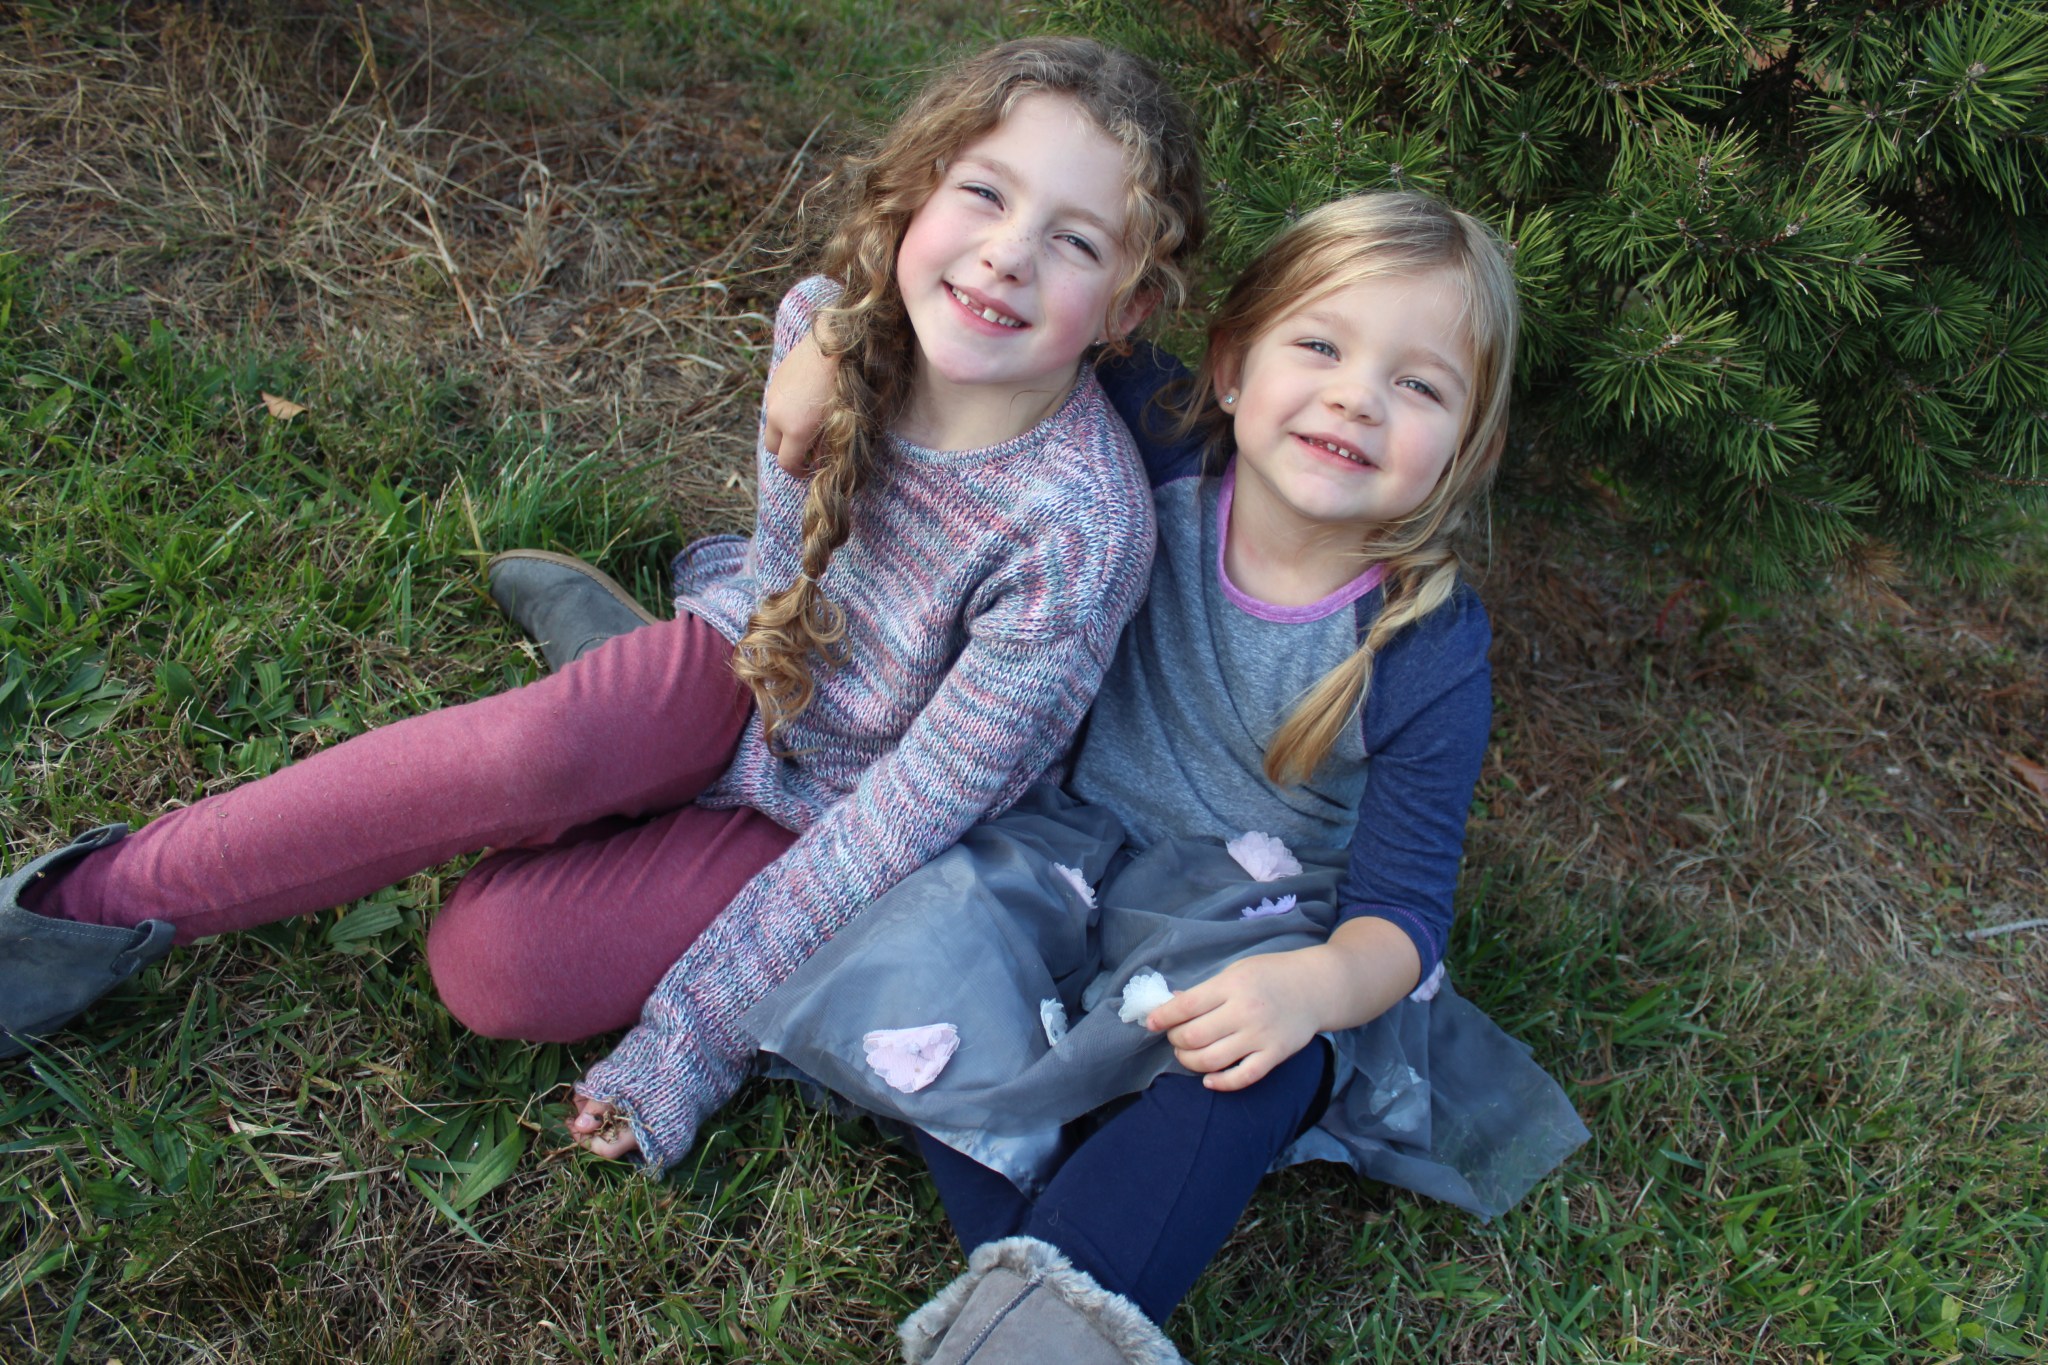 McIntyre-Dewitt’s children, Amelia, age 7 and Ava, age 5 (left to right).